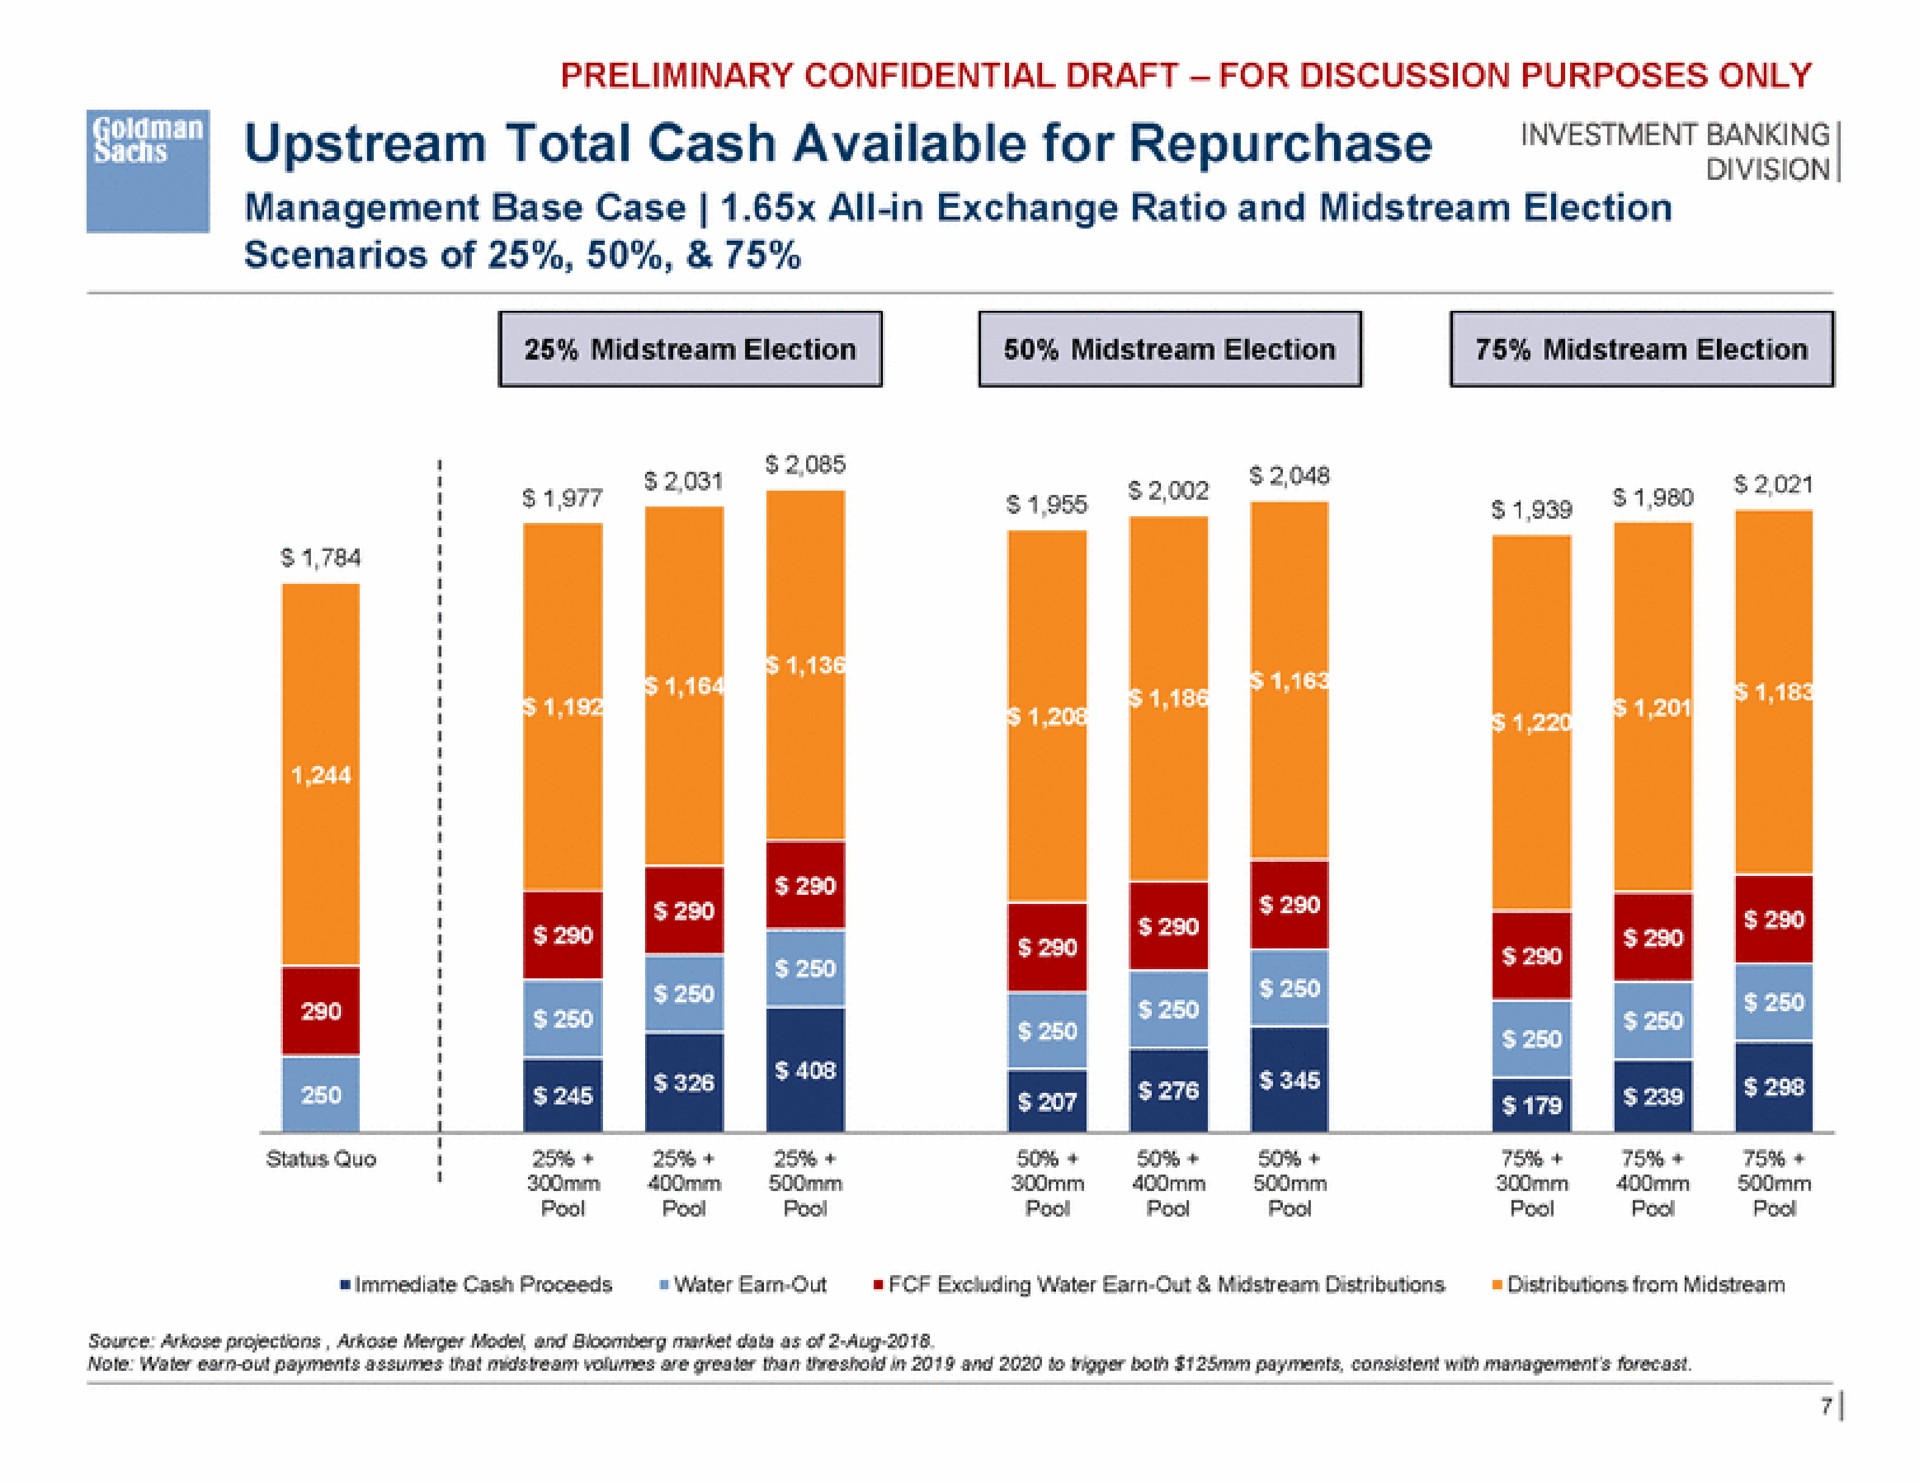 banking upstream total cash available for repurchase | Goldman Sachs